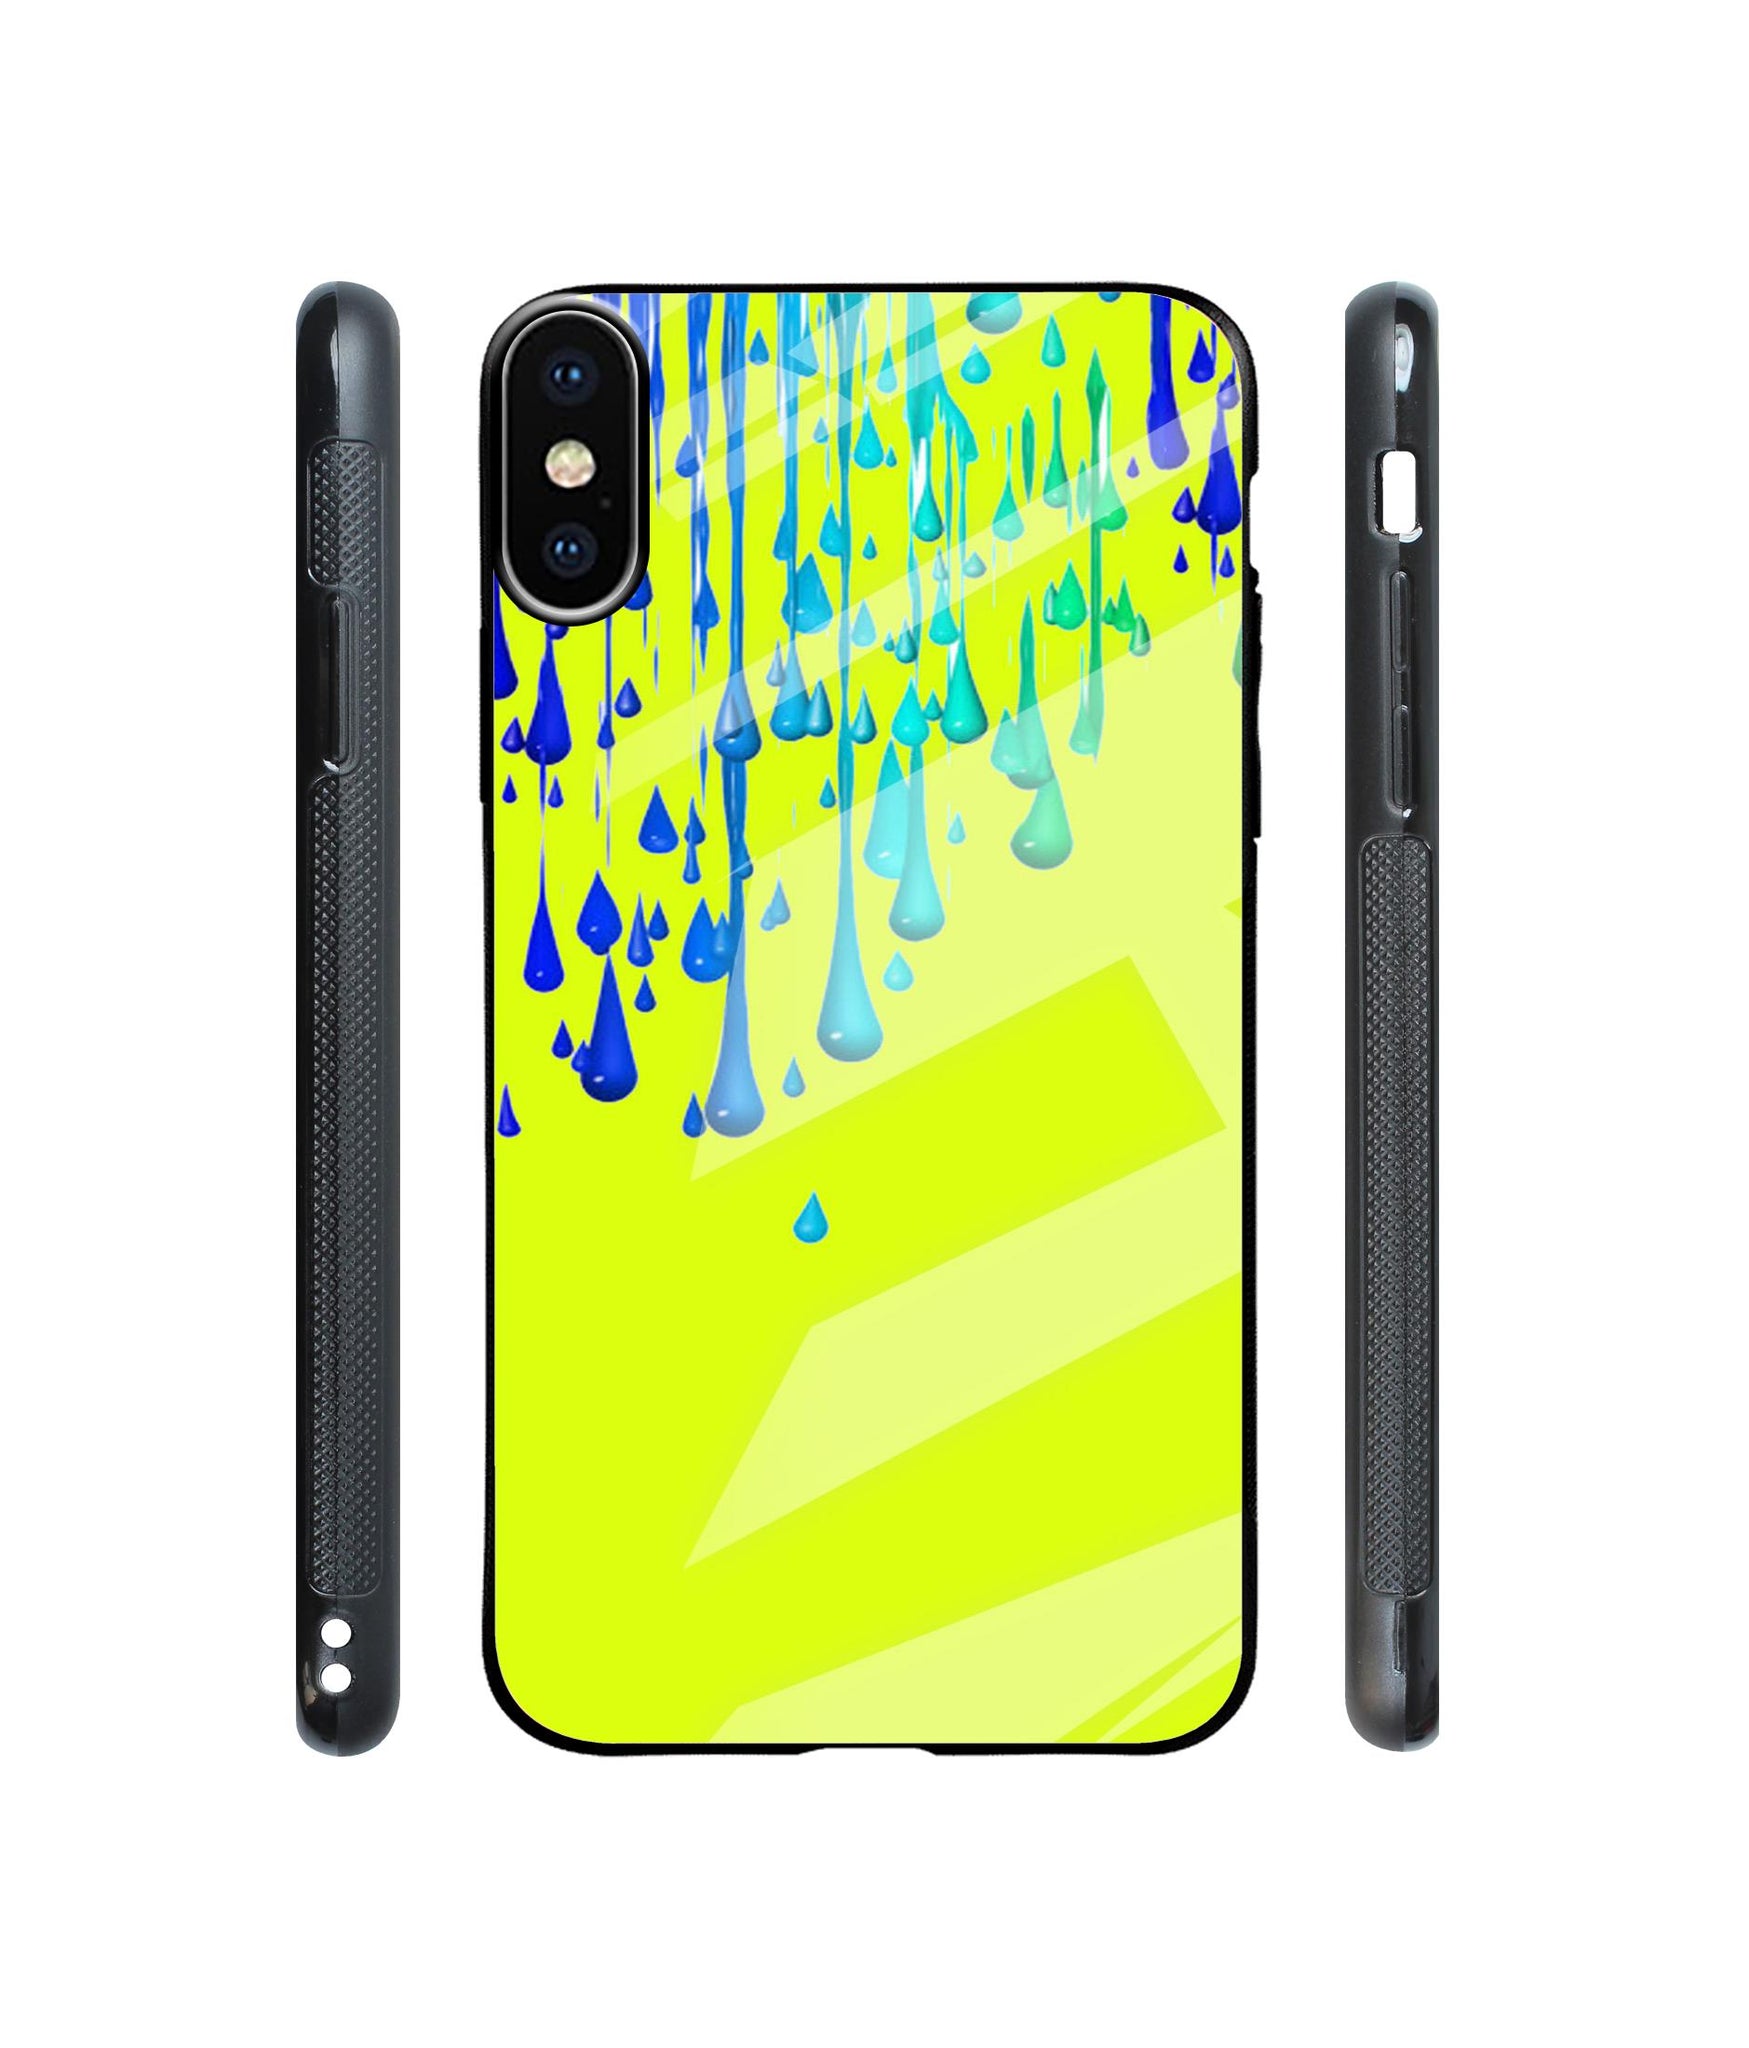 Neon Paint Designer Printed Glass Cover for Apple iPhone XS Max